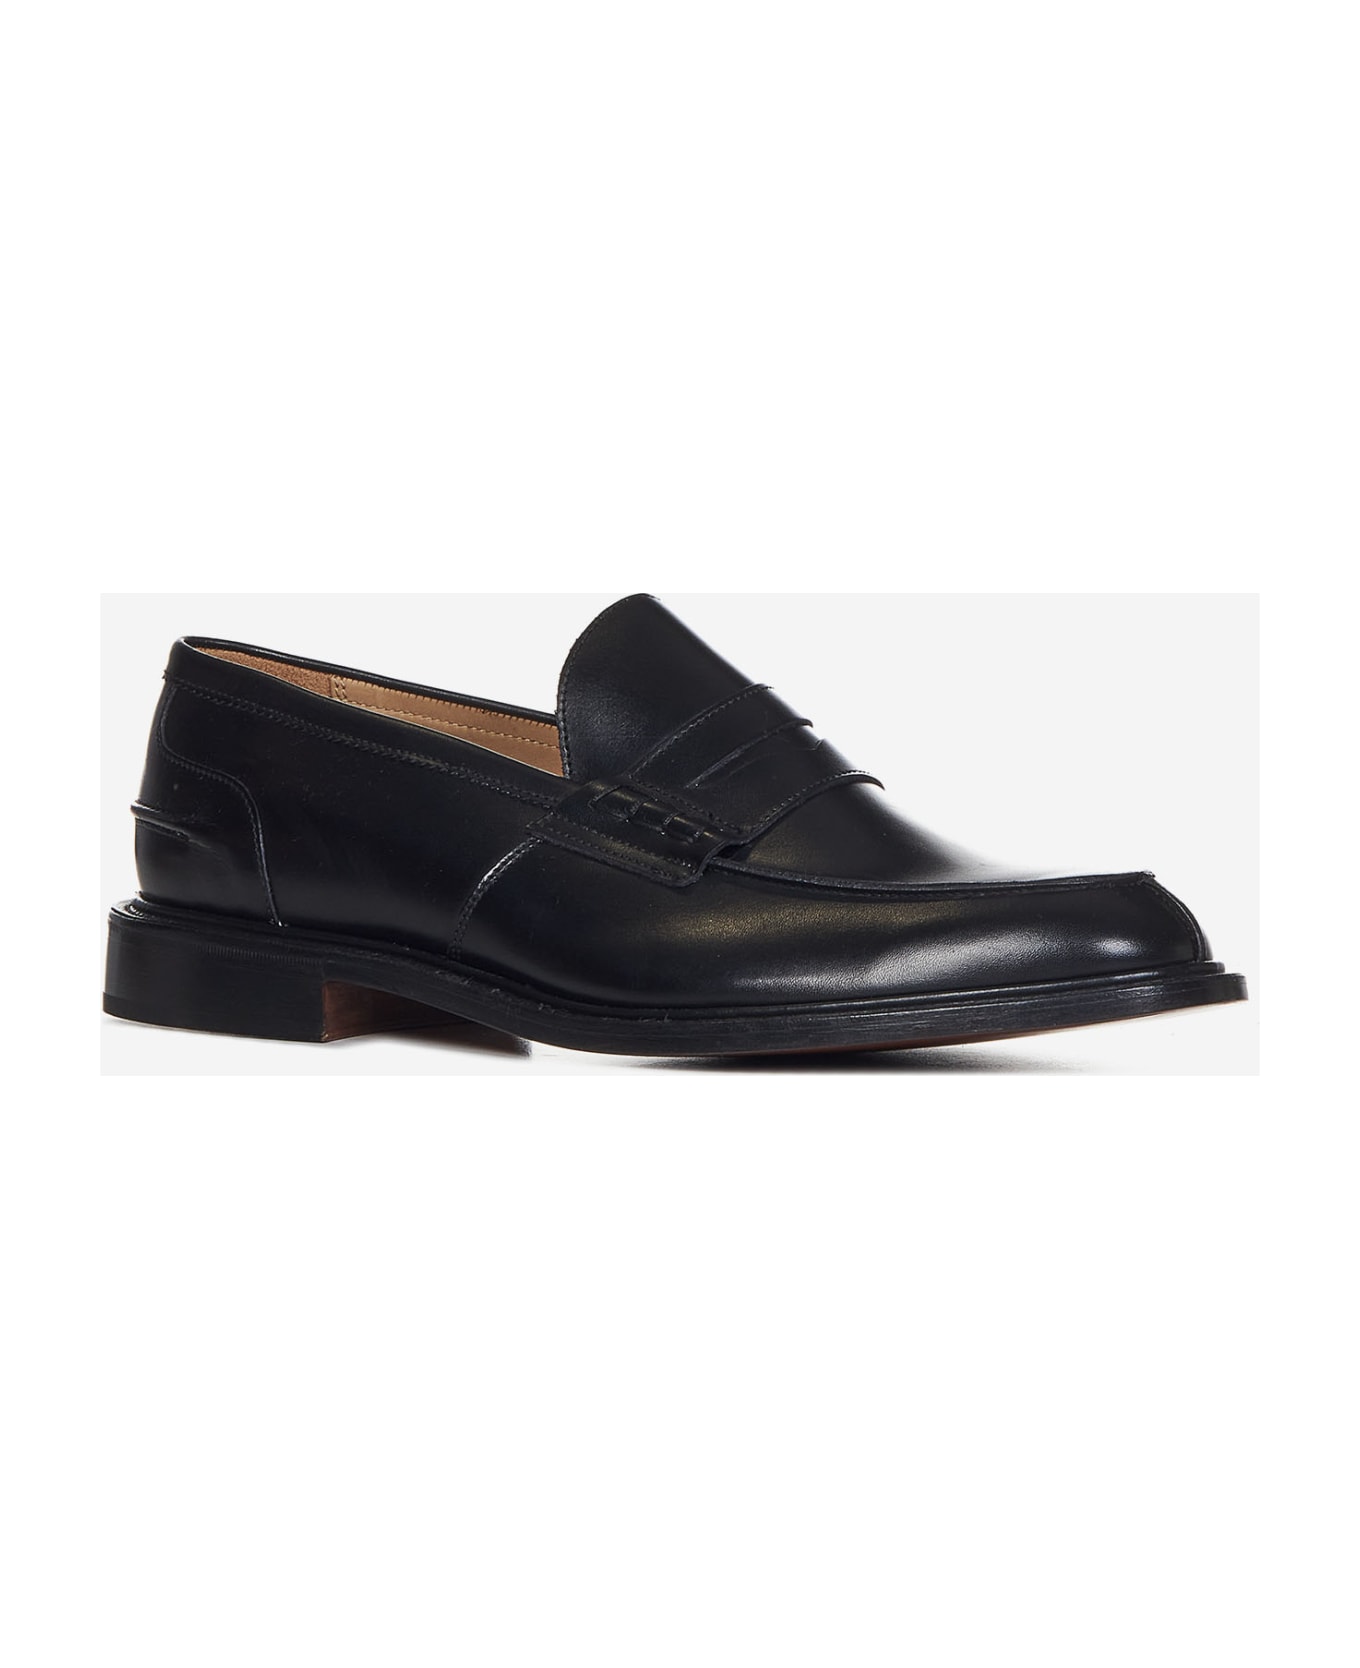 Tricker's James Loafers - Black Calf